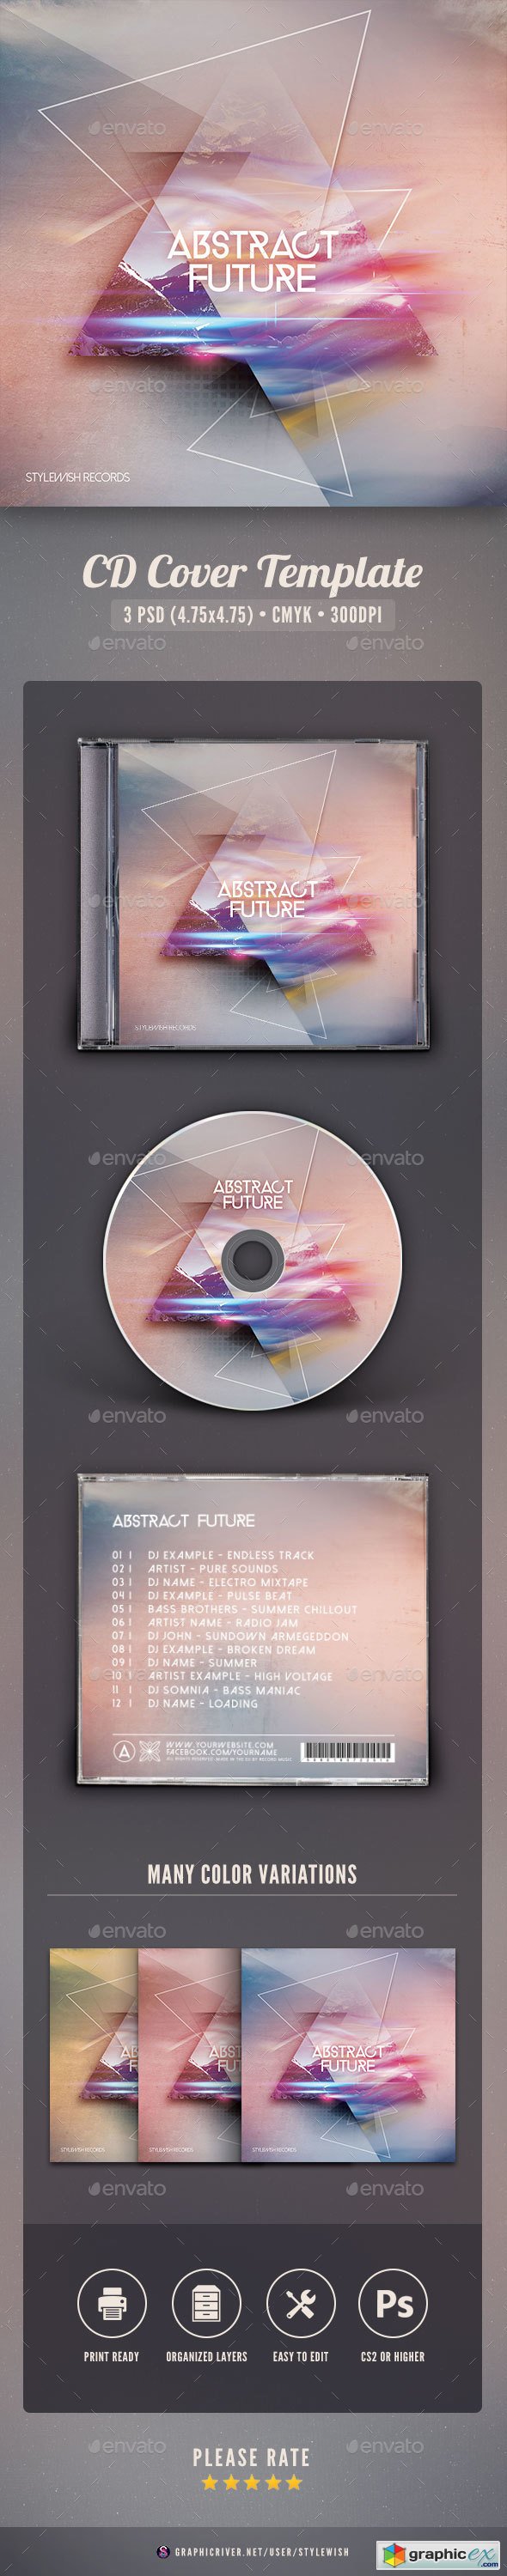 Abstract Future CD Cover Artwork